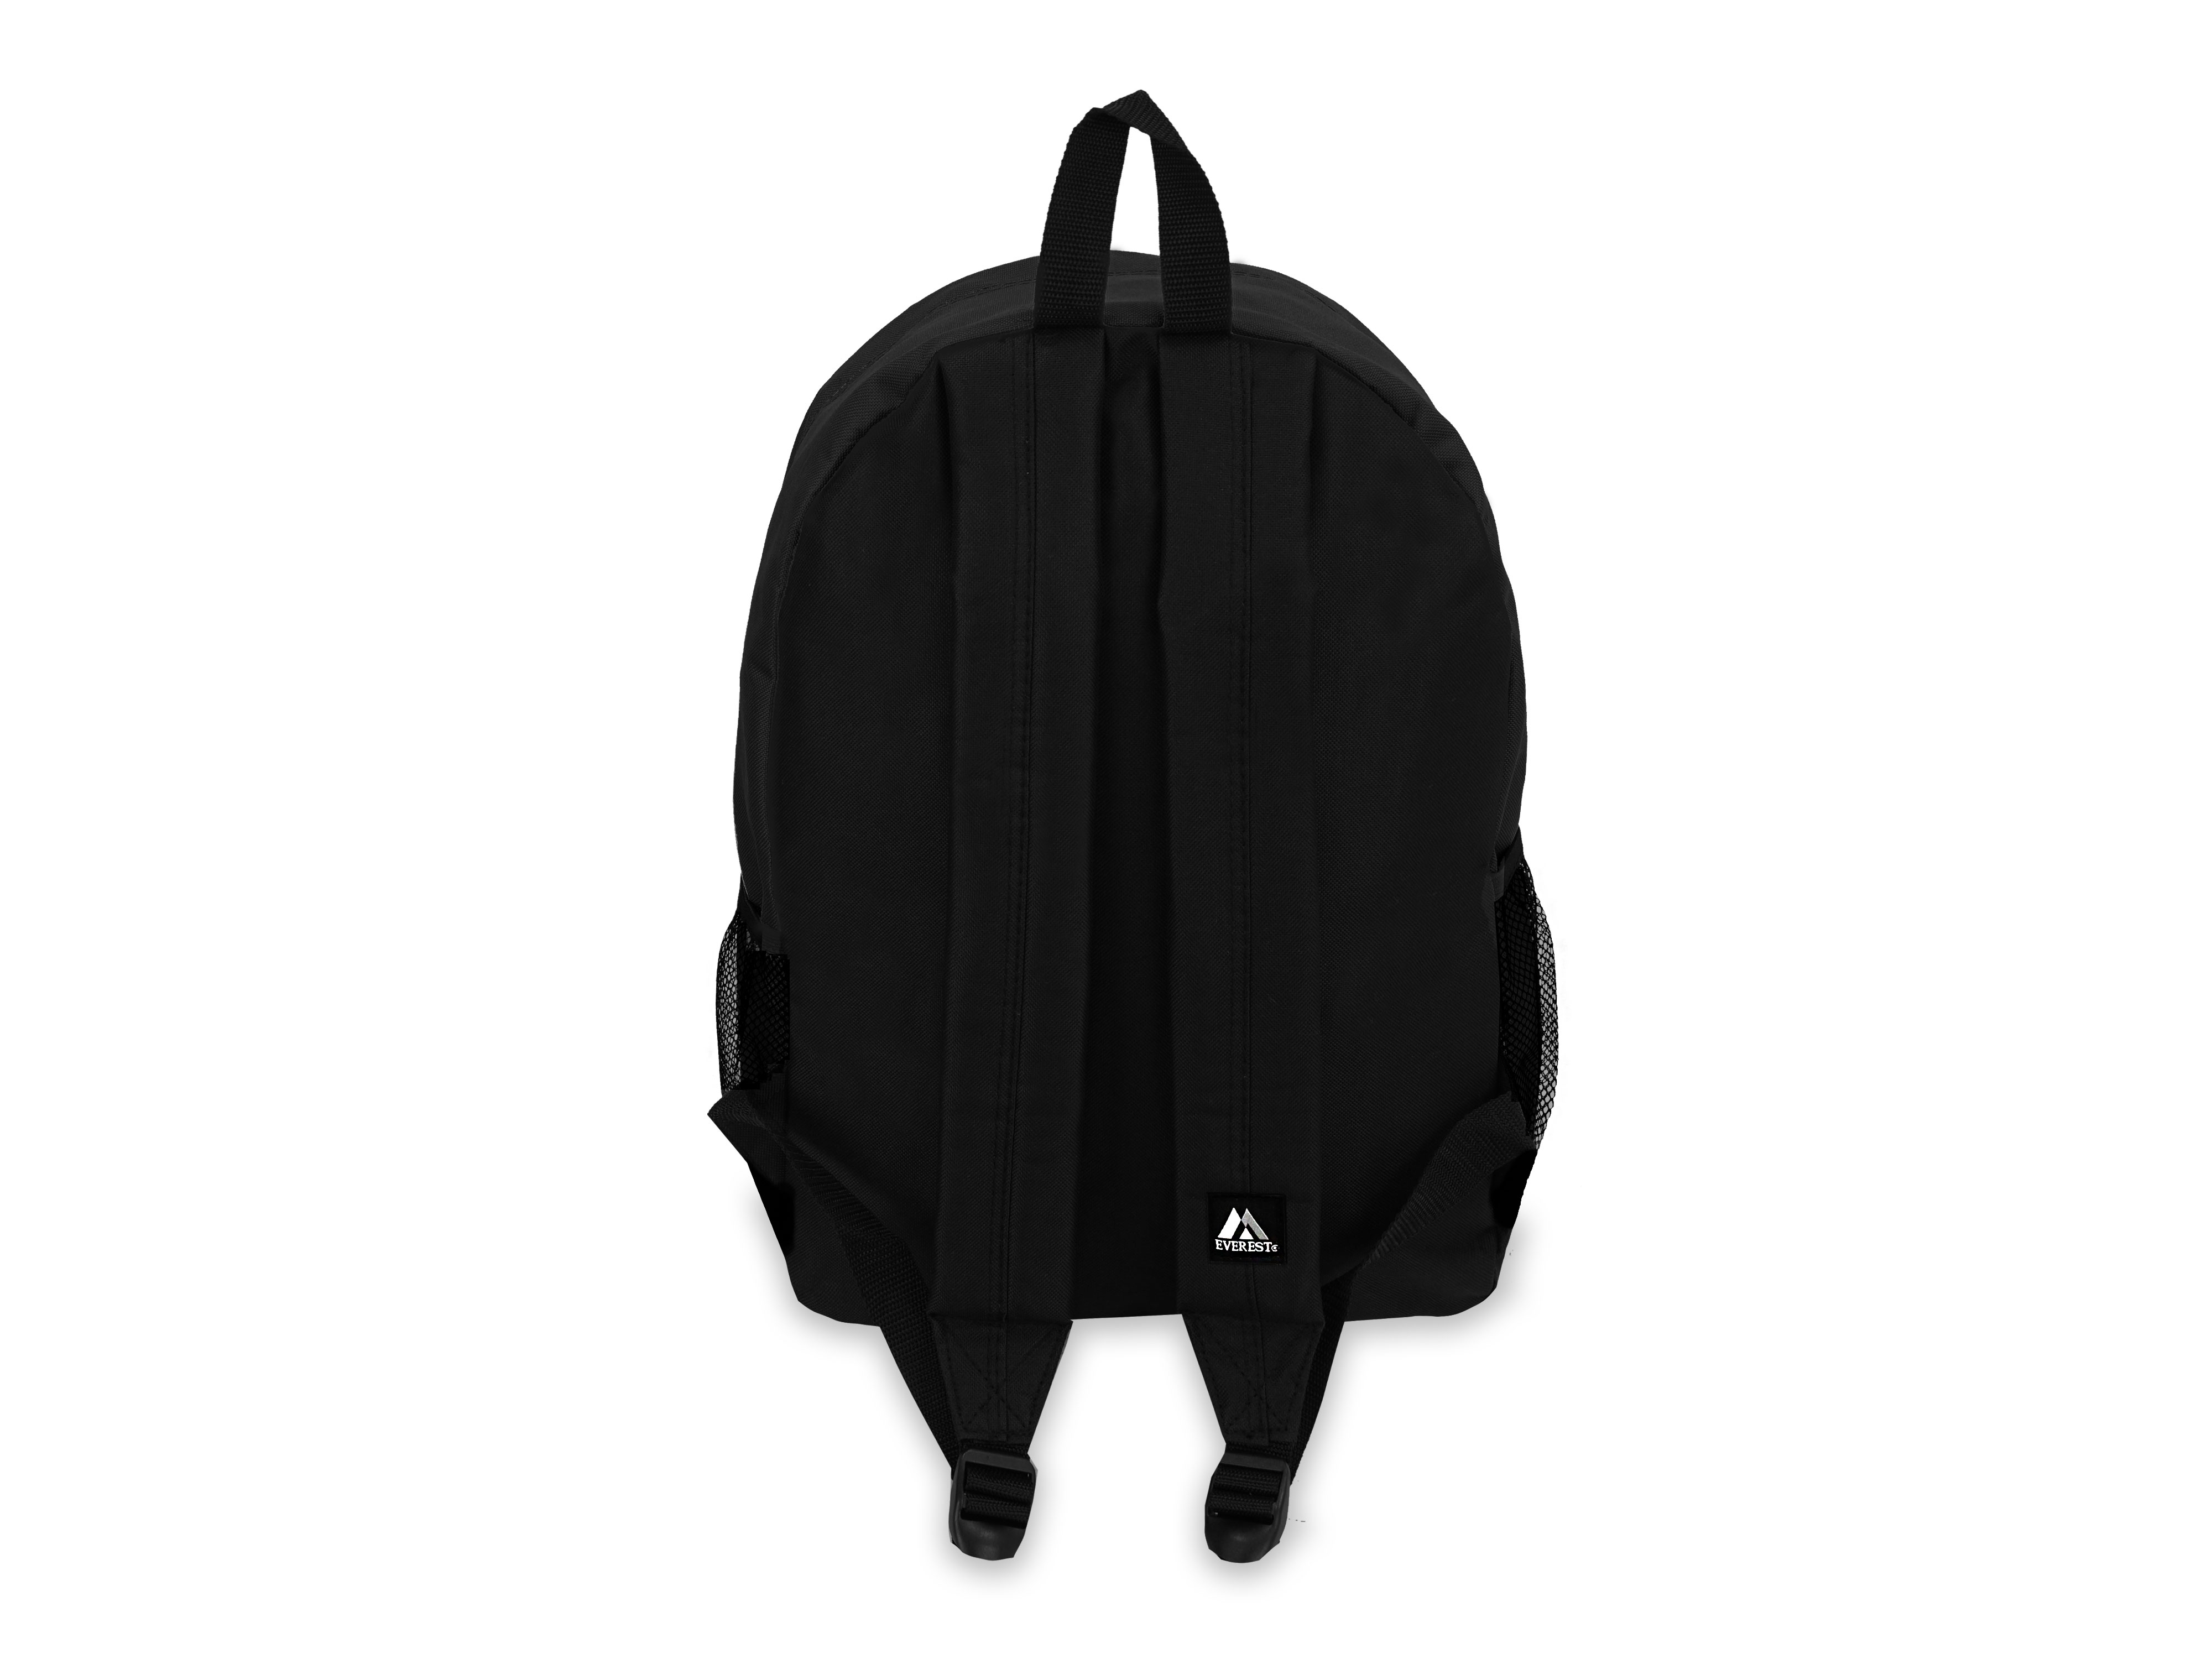 Everest Unisex Backpack with Front and Side Pockets, Black - image 3 of 4